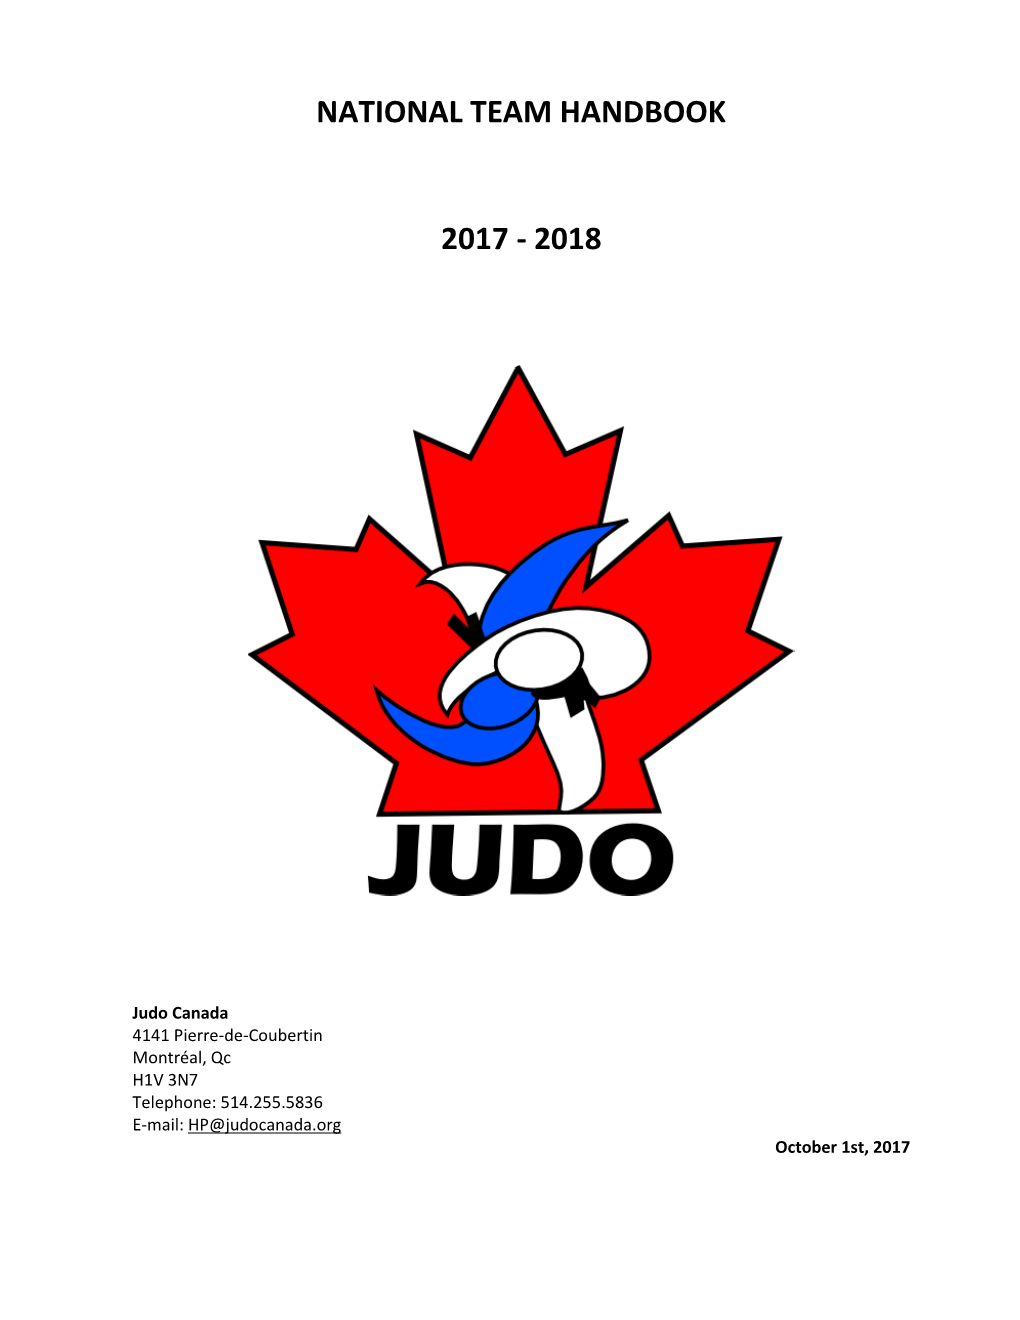 National Team Handbook 2017-2018 Edition) Must Be Achieved in the Same Weight Class in Which the Athlete Is Selected to Compete in the World Championships